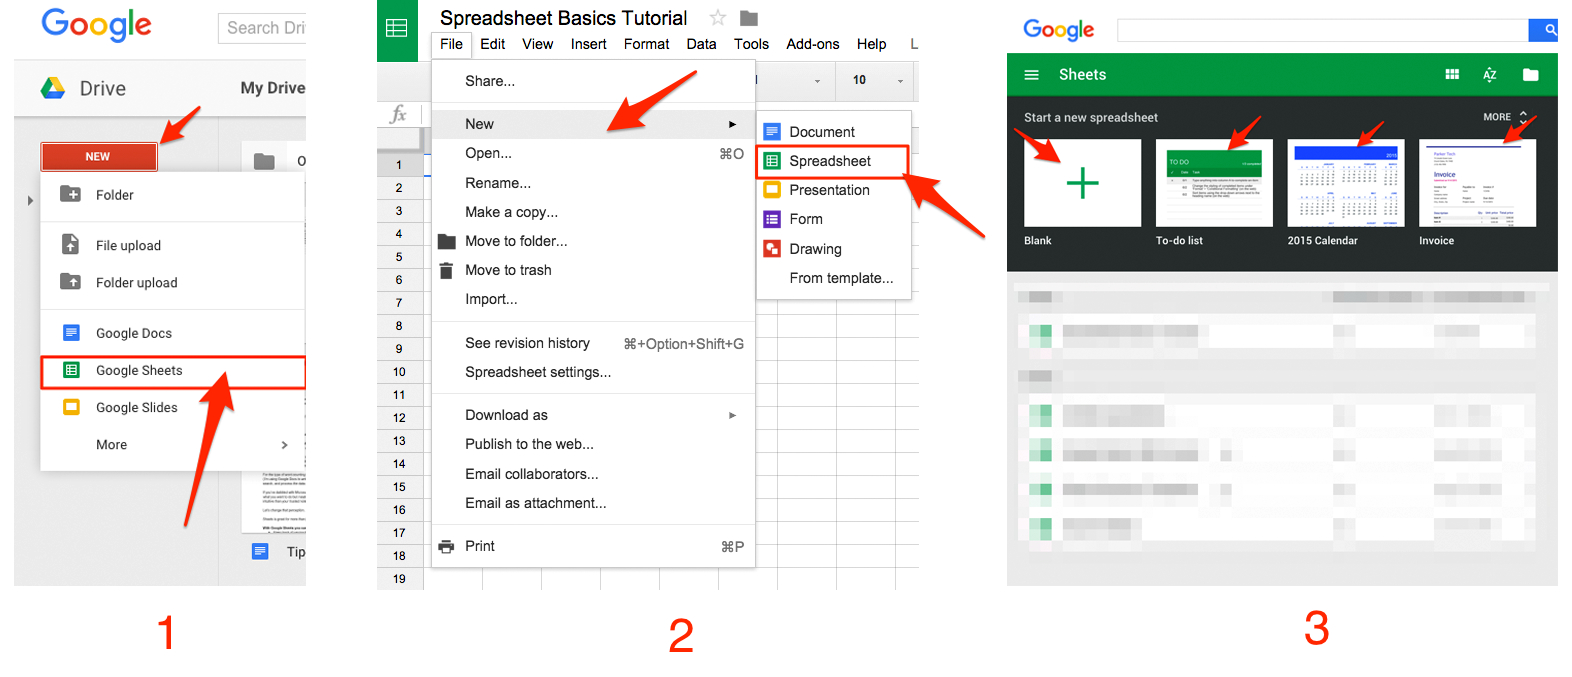 How To Do A Spreadsheet On The Computer For Google Sheets 101: The Beginner's Guide To Online Spreadsheets  The